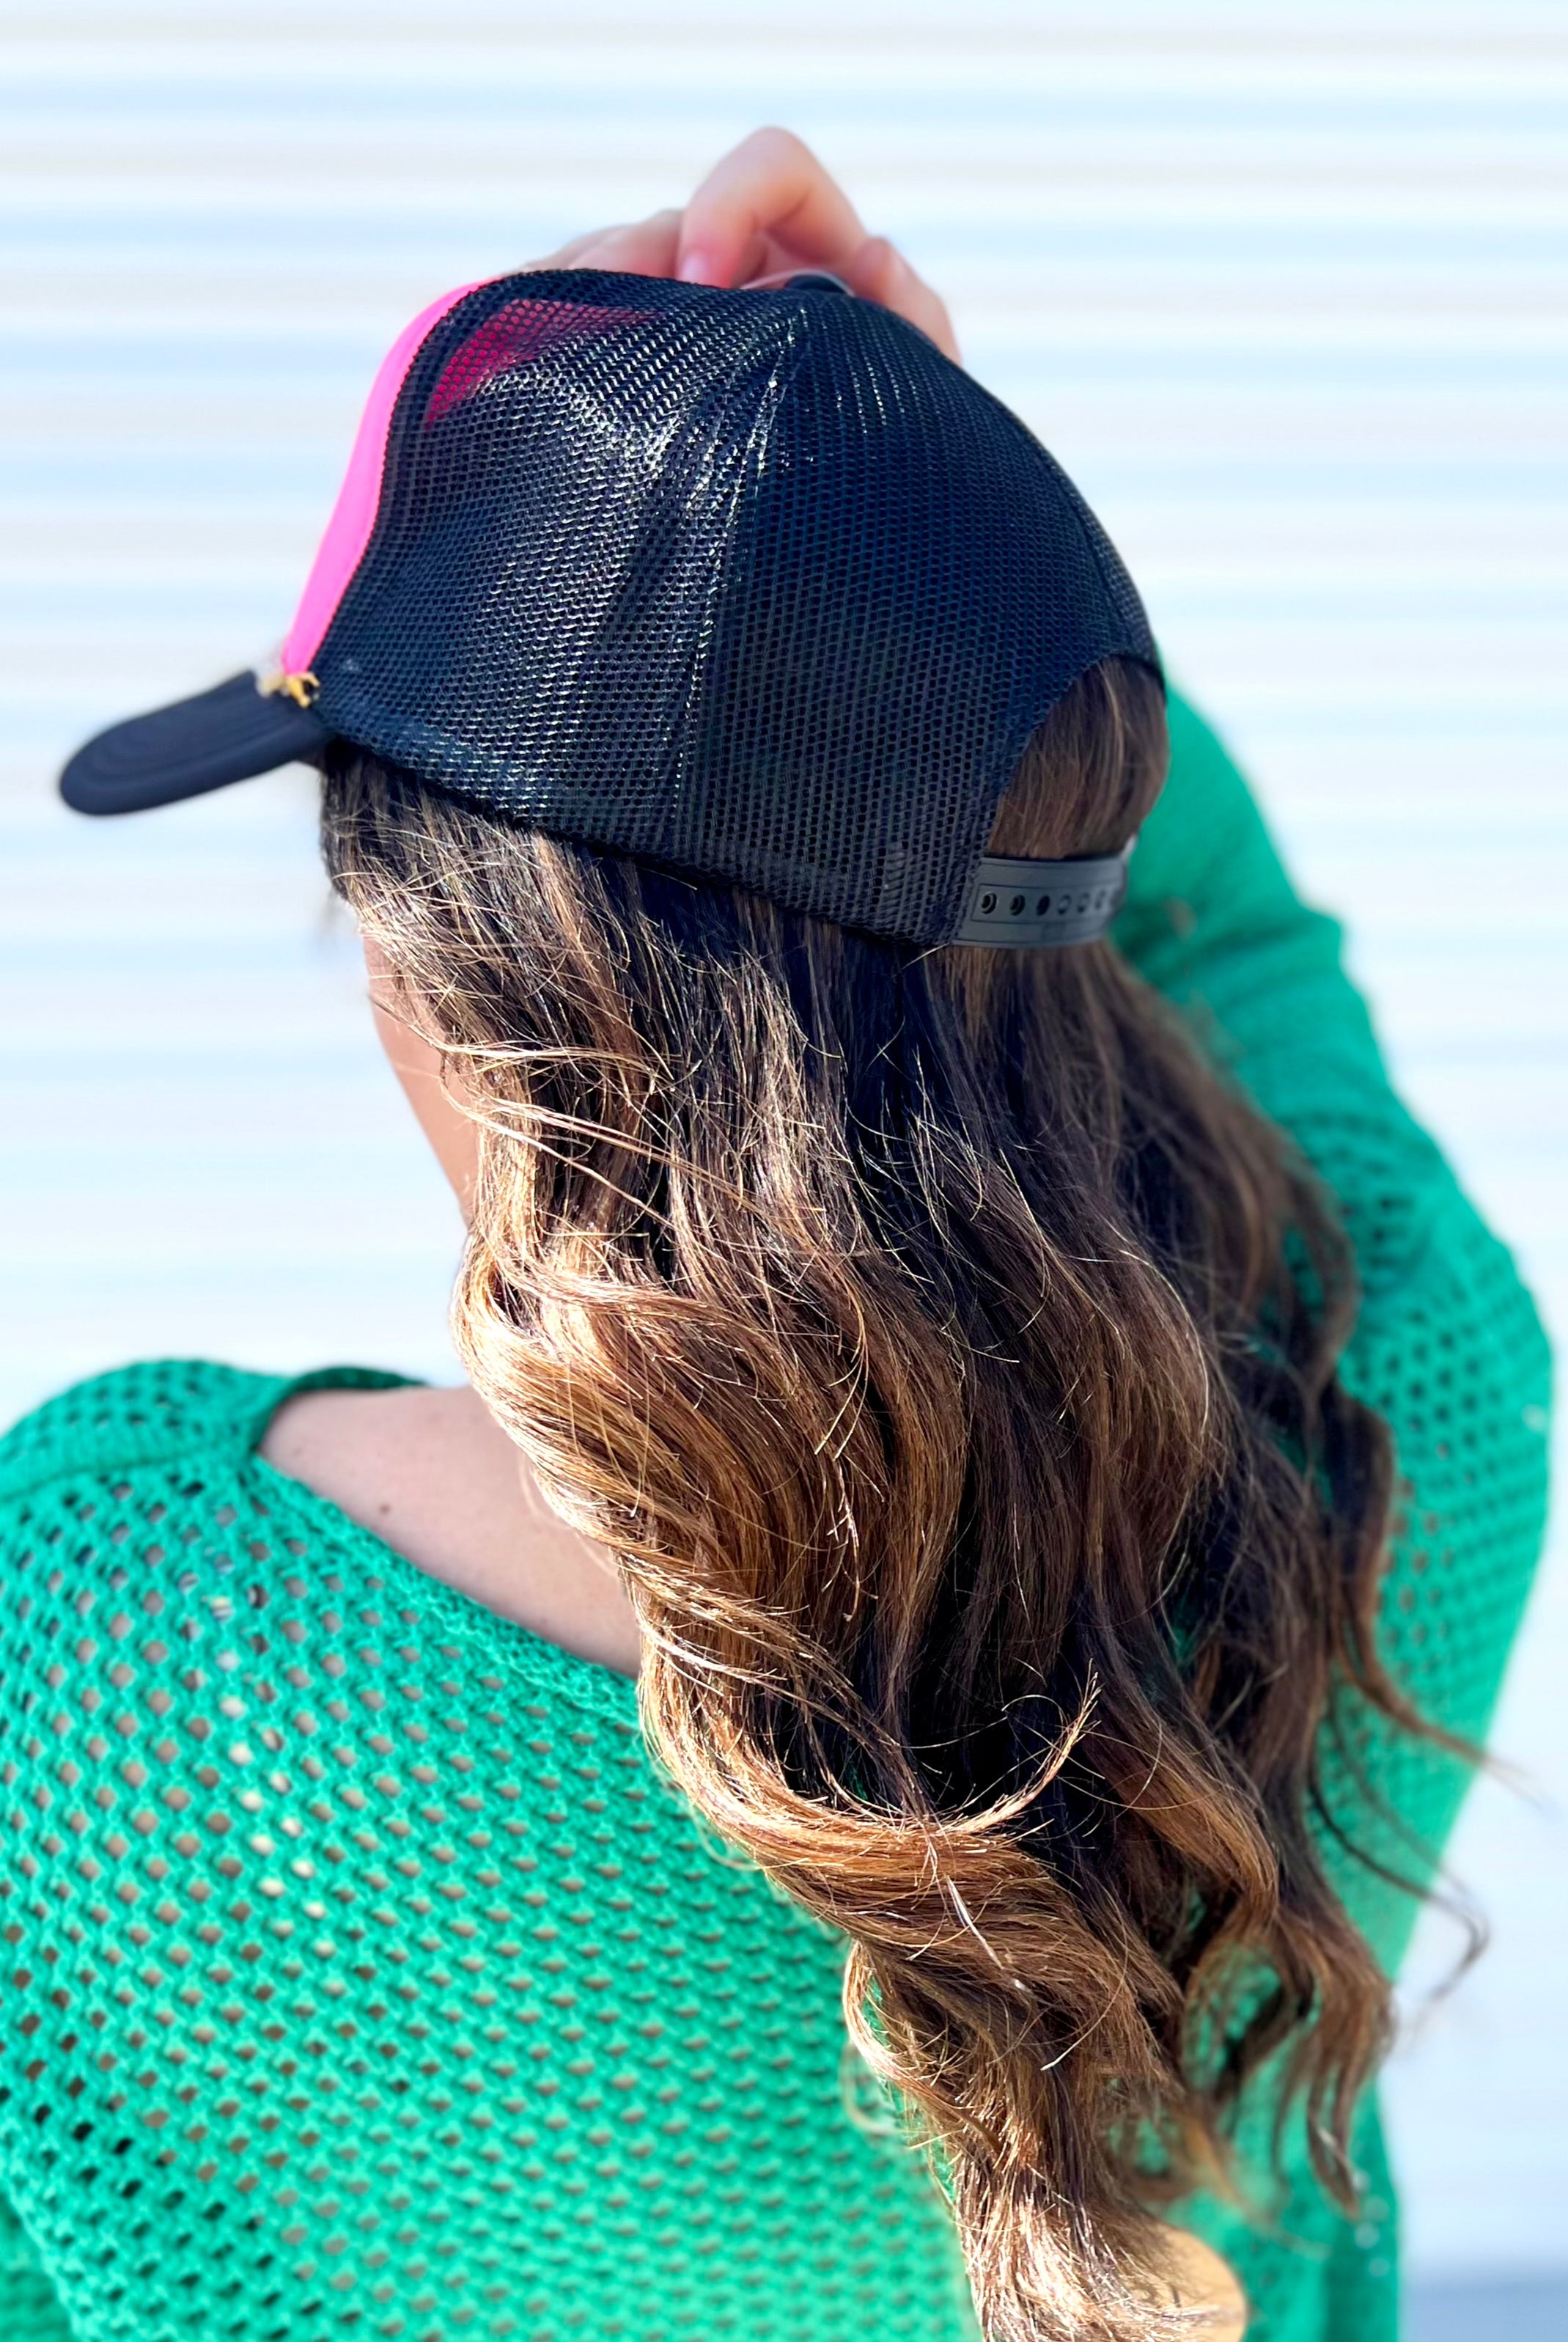 Neon Pink Butterfly Trucker Hat-330 Headwear-Summer Tees-Heathered Boho Boutique, Women's Fashion and Accessories in Palmetto, FL